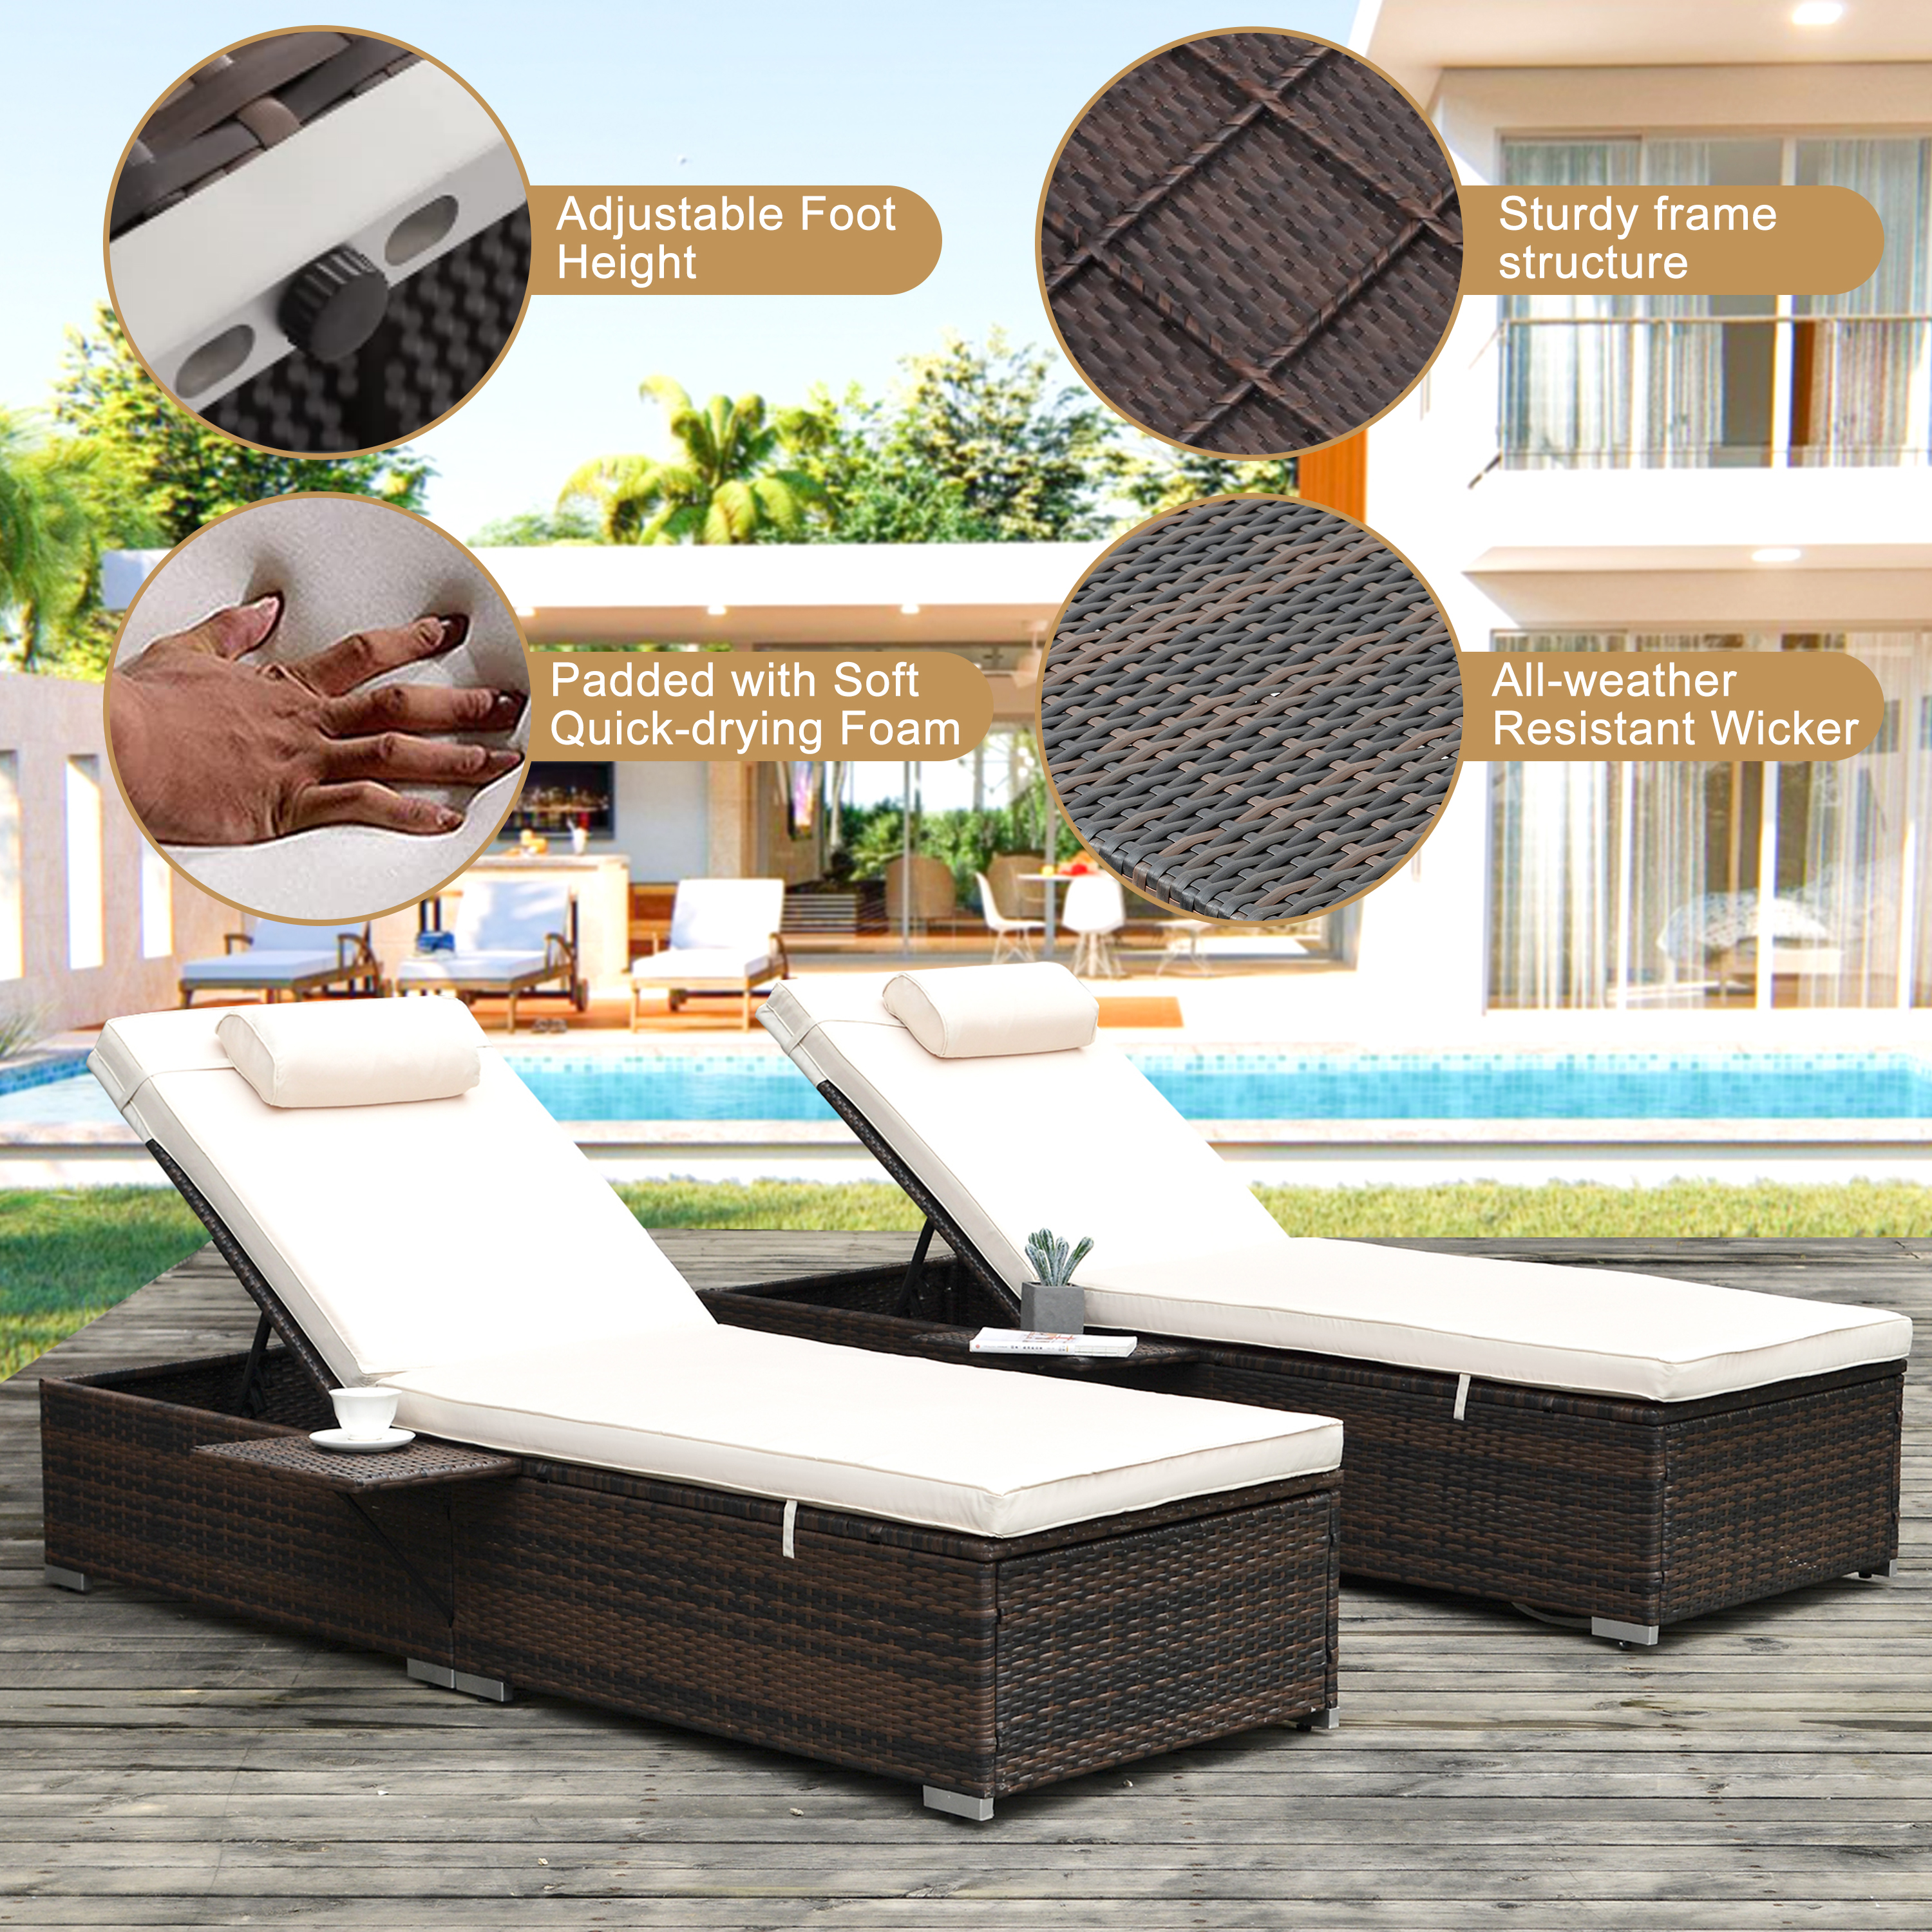 Outdoor Patio Lounge Furniture Set of 2, All-Weather Wicker Adjustable Backrest Recliners with Side Table, Pool Chaise Chairs Sets with Comfort Head Pillow, Glass Top Coffee Table, SS2349 - image 2 of 8